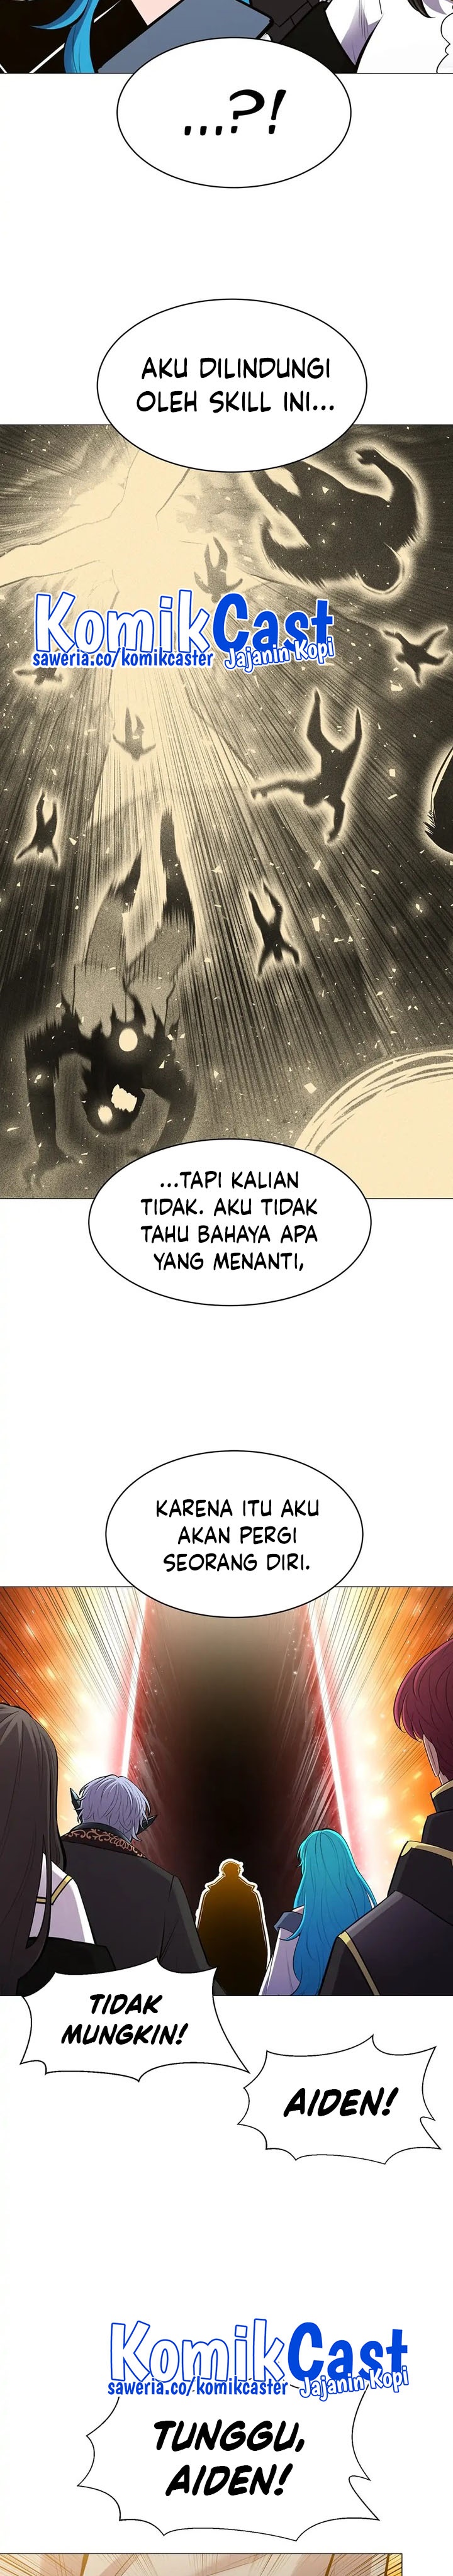 Updater Chapter 102